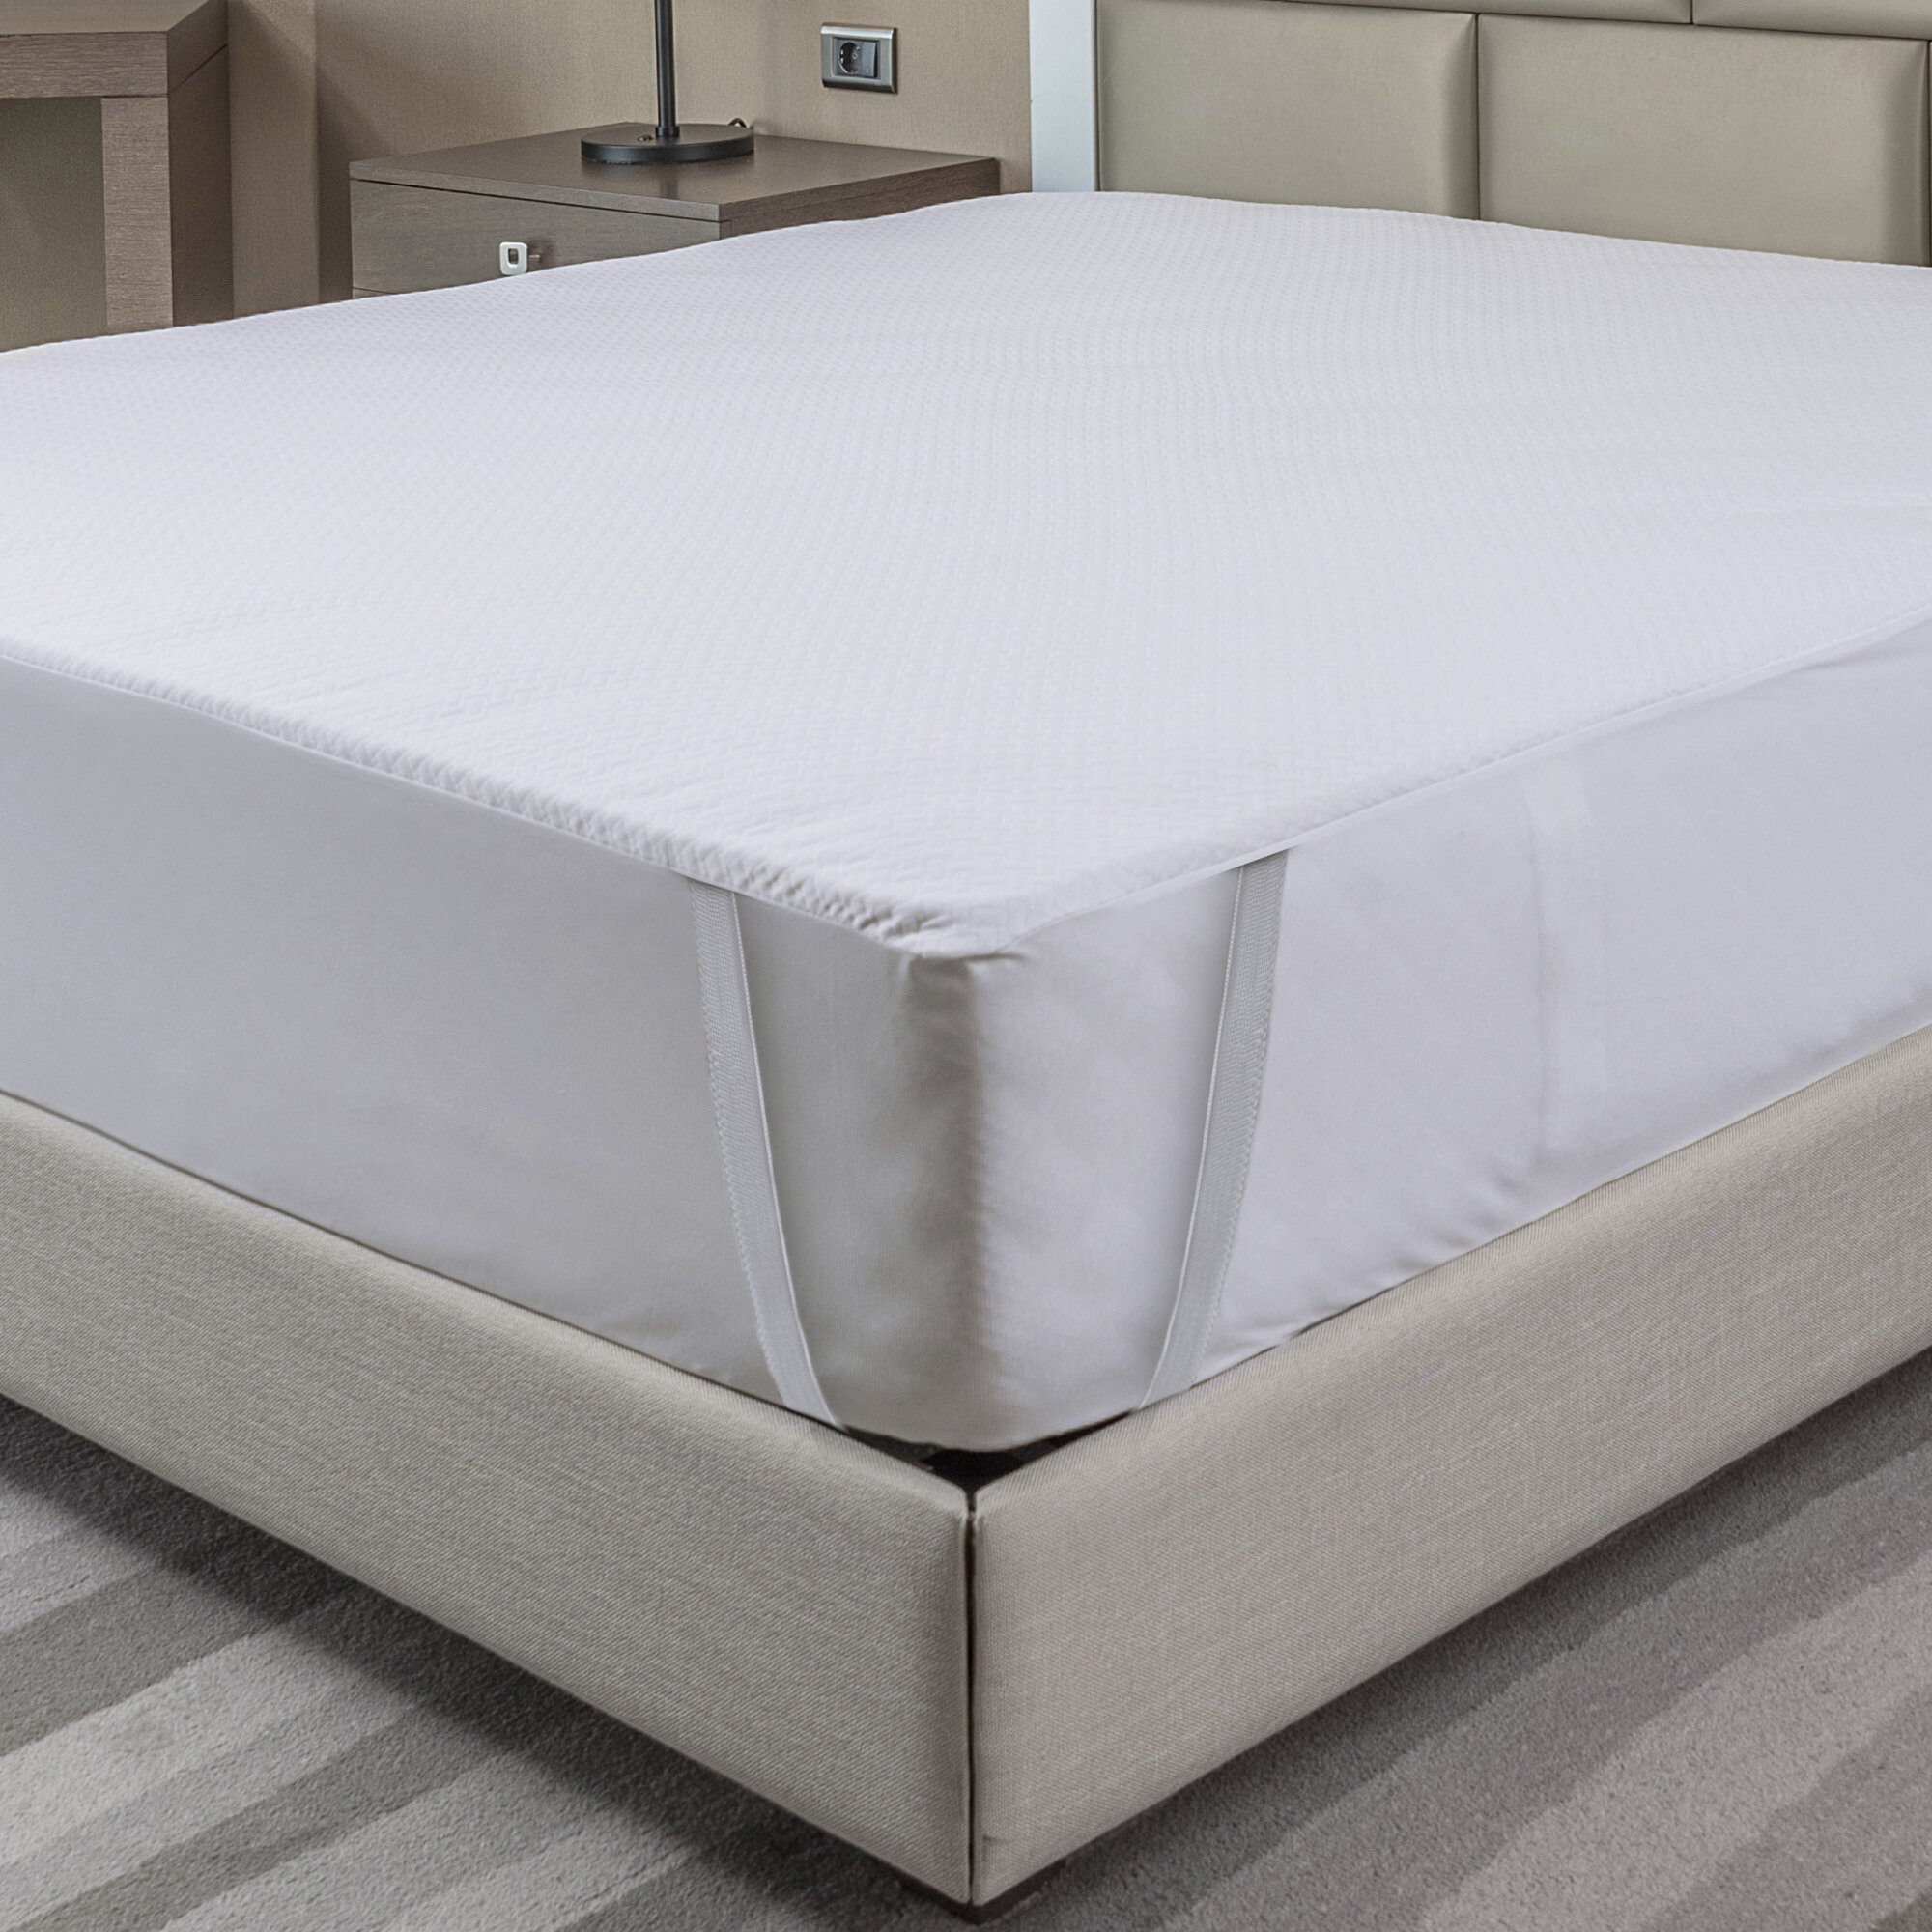 Premium Twin XL Mattress Protector Waterproof Fitted Sheet Bed Cover Breathable